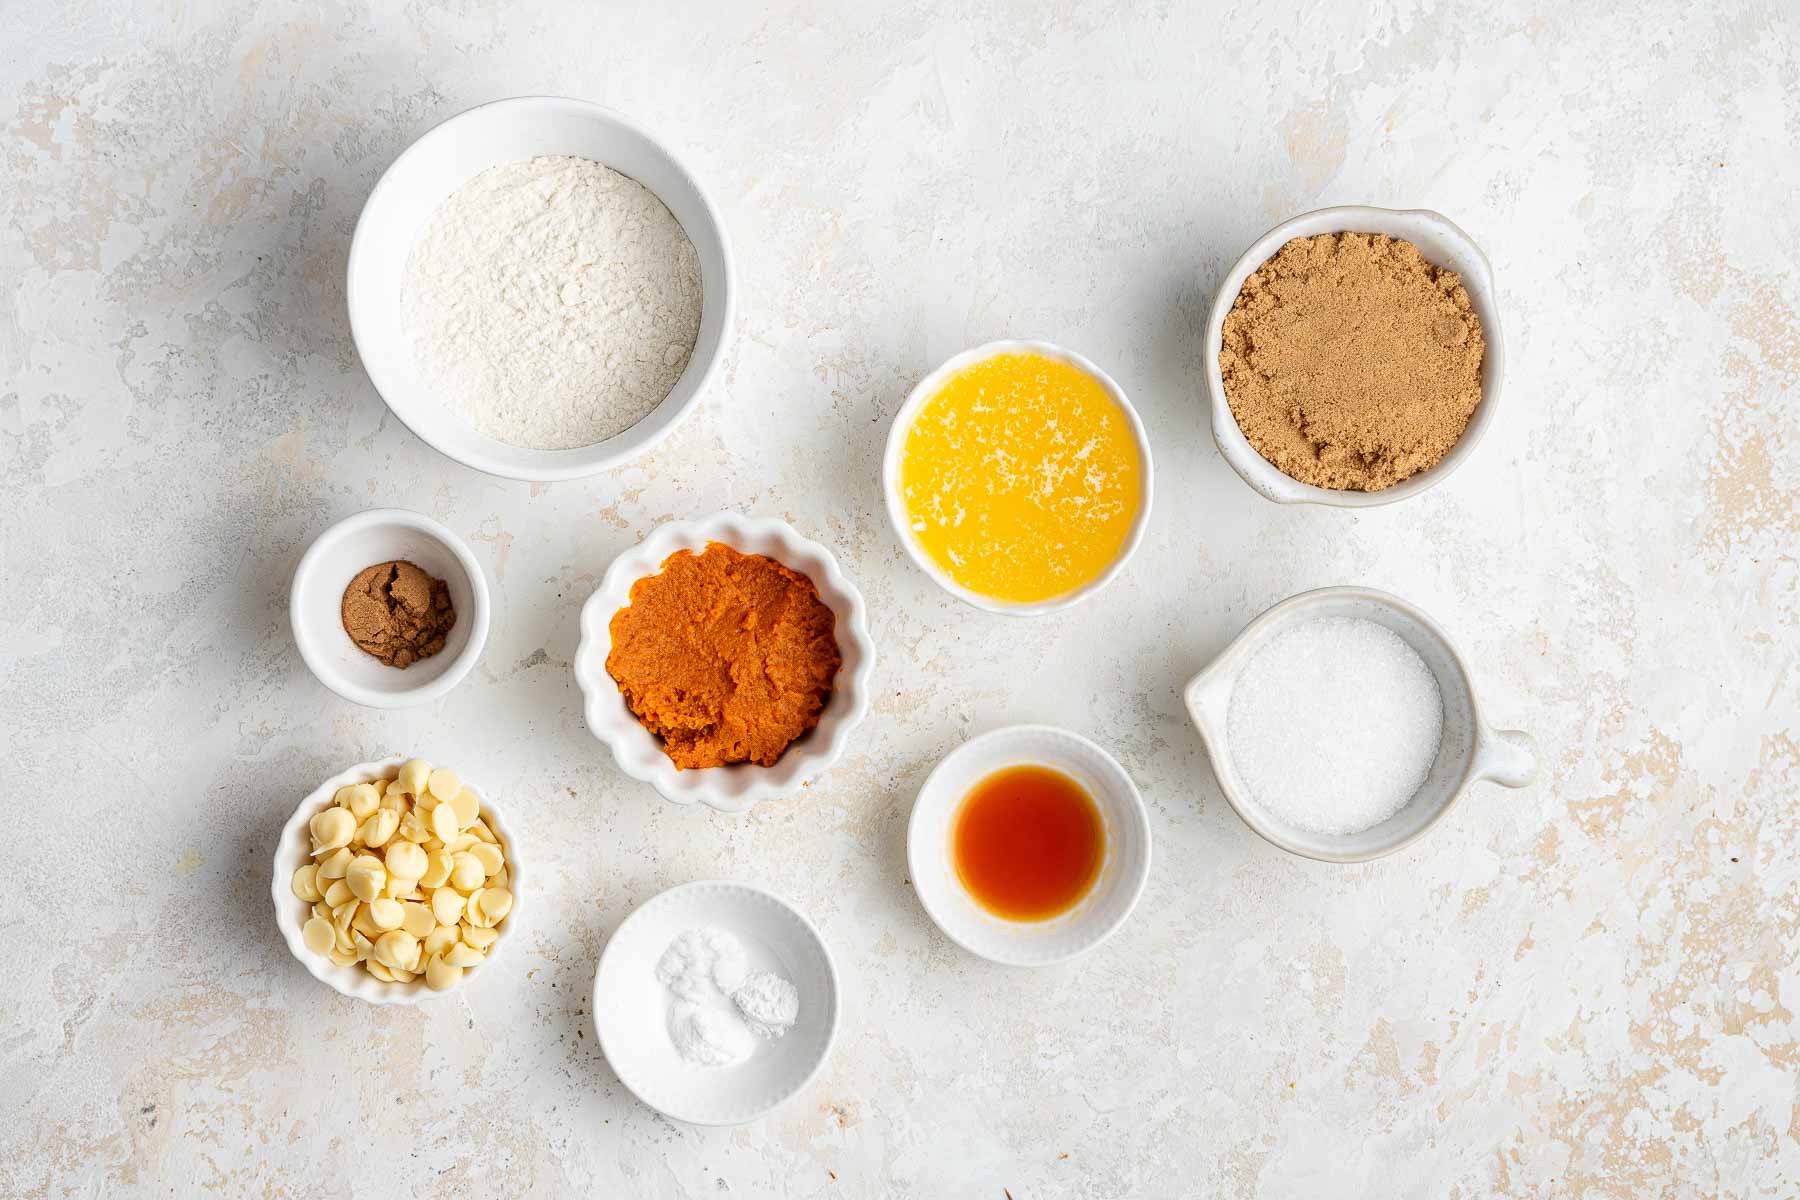 FLour, sugar, melted butter, pumpkin and spices in small bowls on white counter.